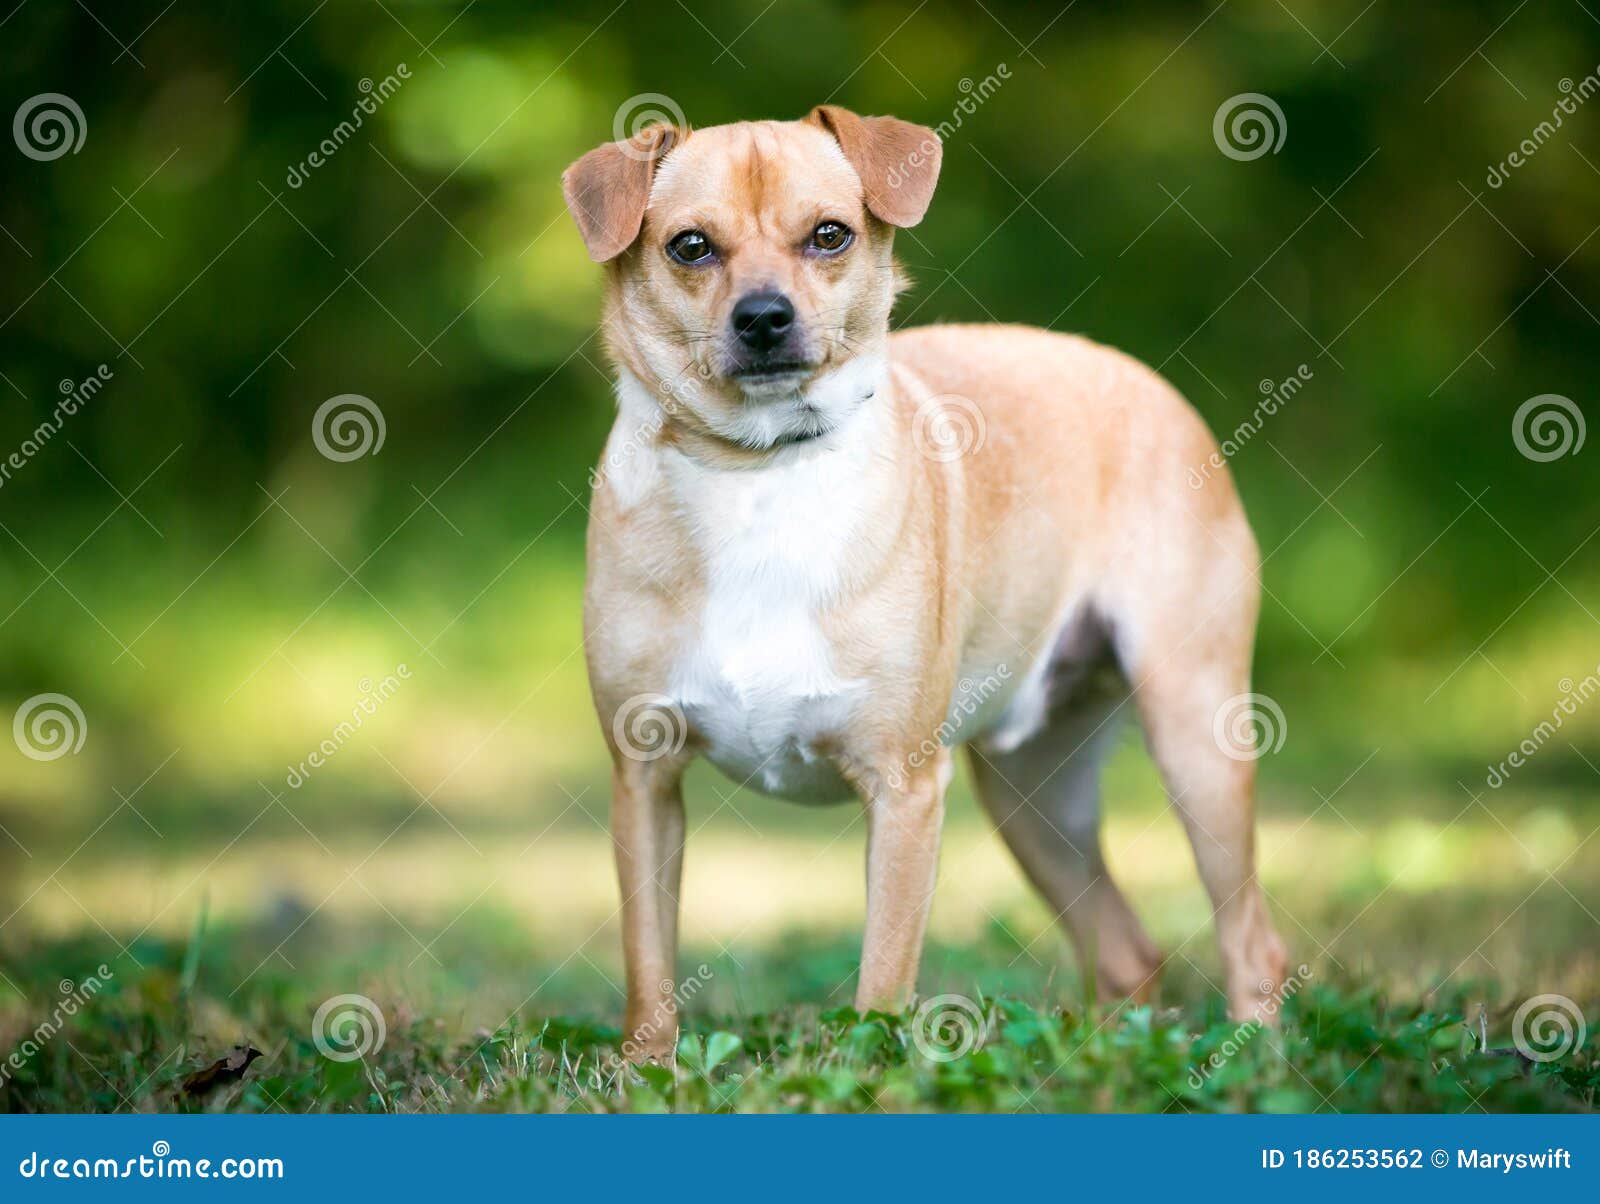 A Small Terrier Mixed Breed Dog Standing Outdoors Stock Photo - Image ...